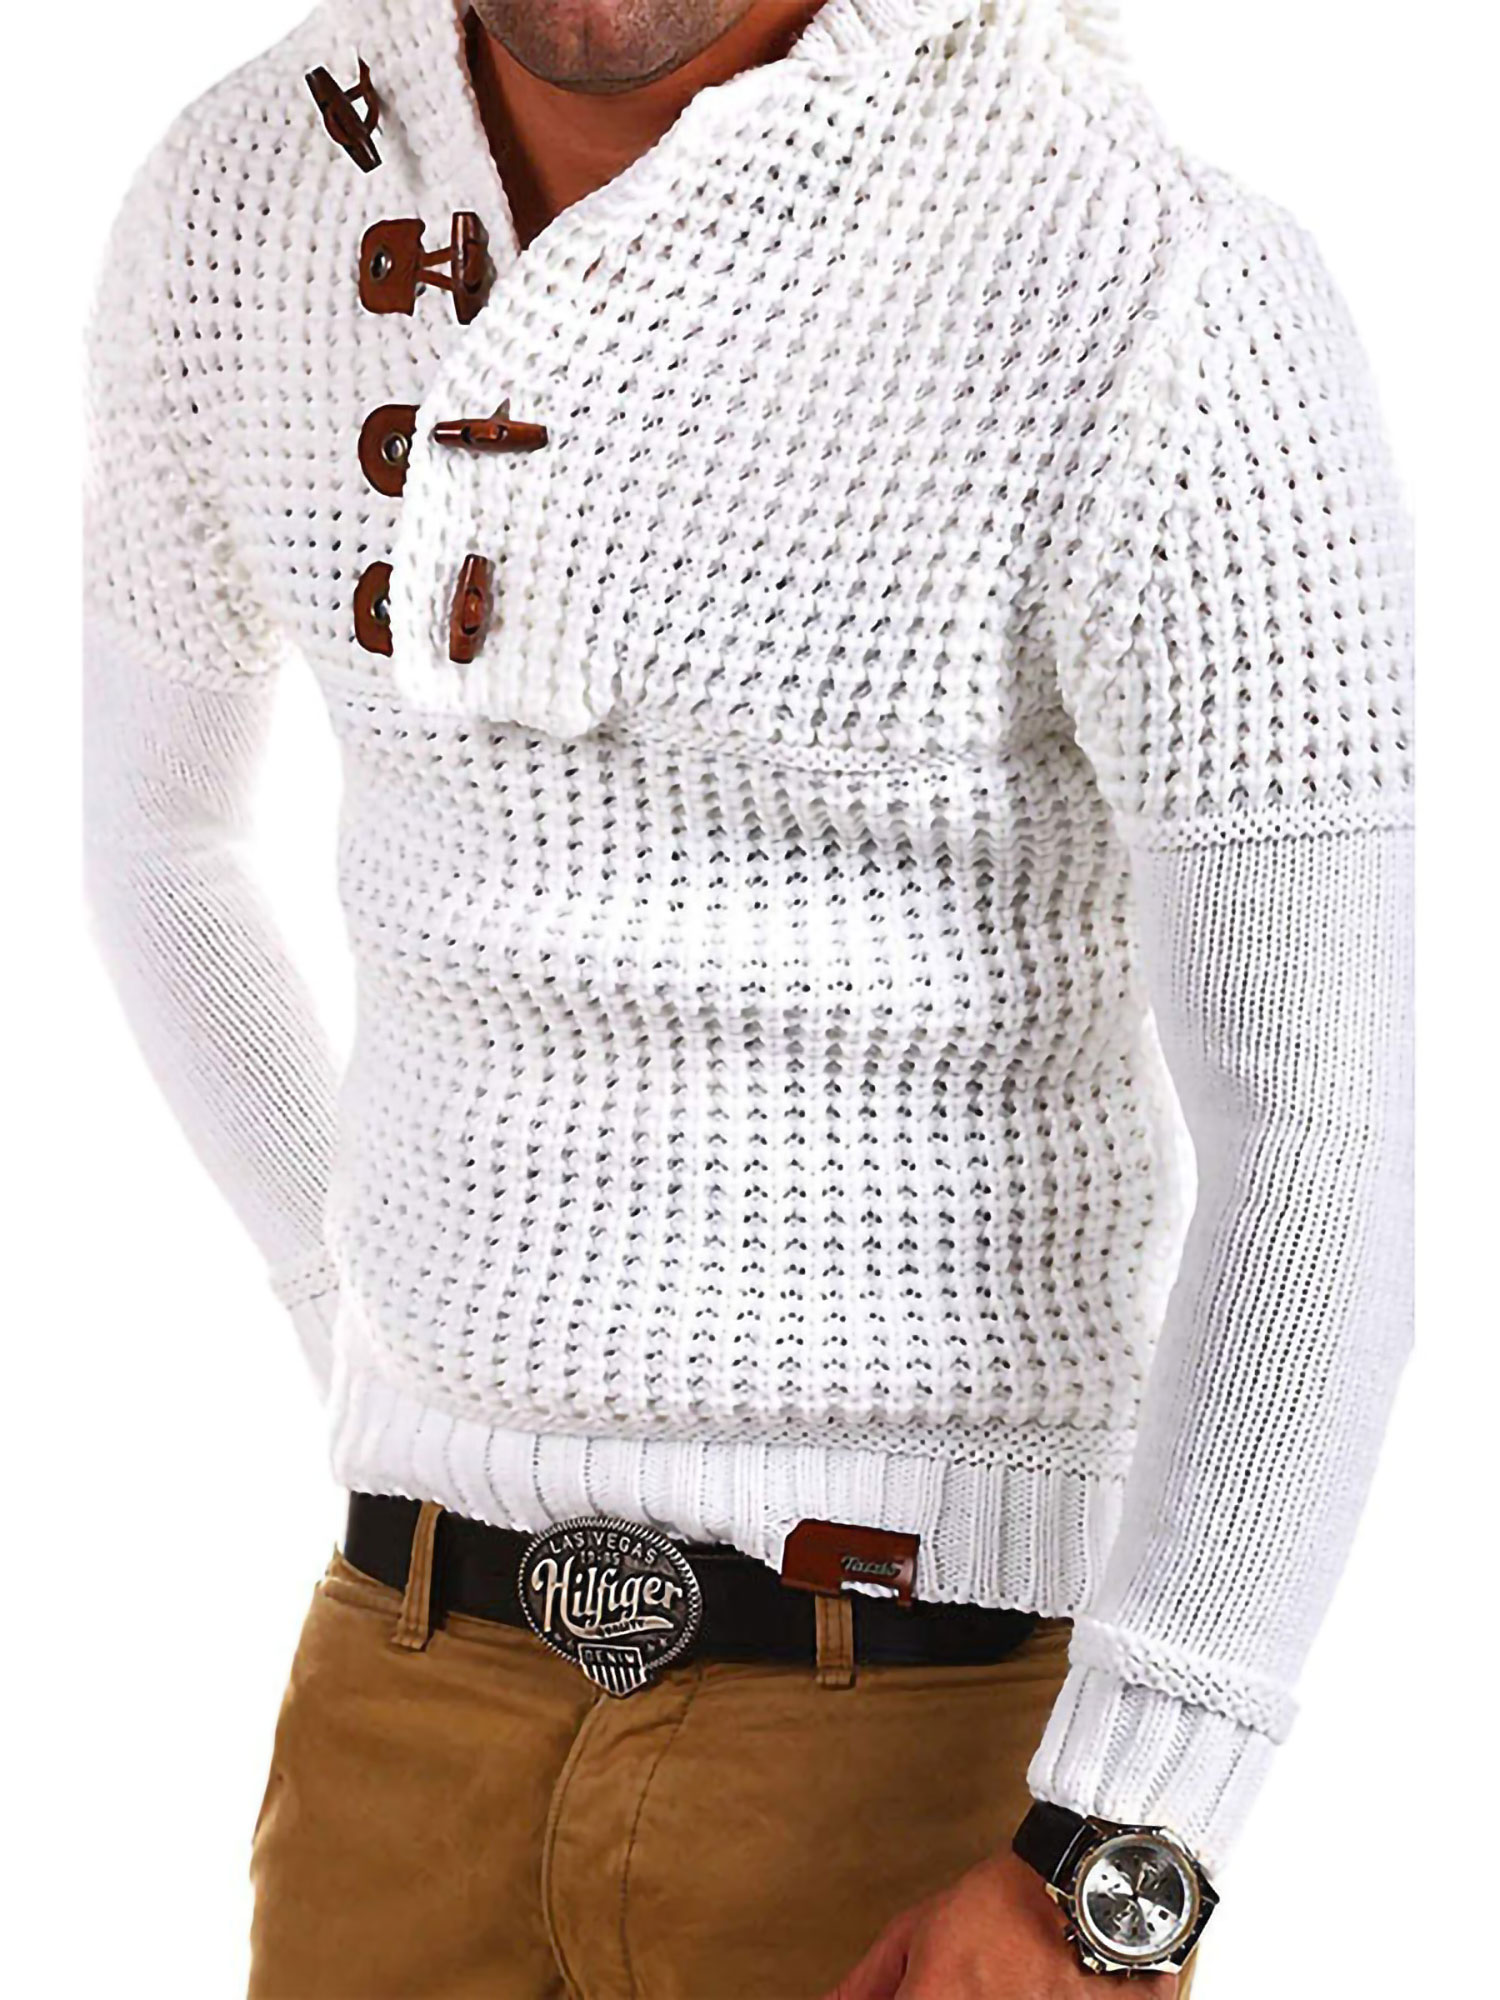 CVLIFE Fashion Plus Size Cable Knit Long Sleeve Hooded Sweater for Men Slim Fit Button Placket Sweater Jumper with Pockets - image 1 of 2